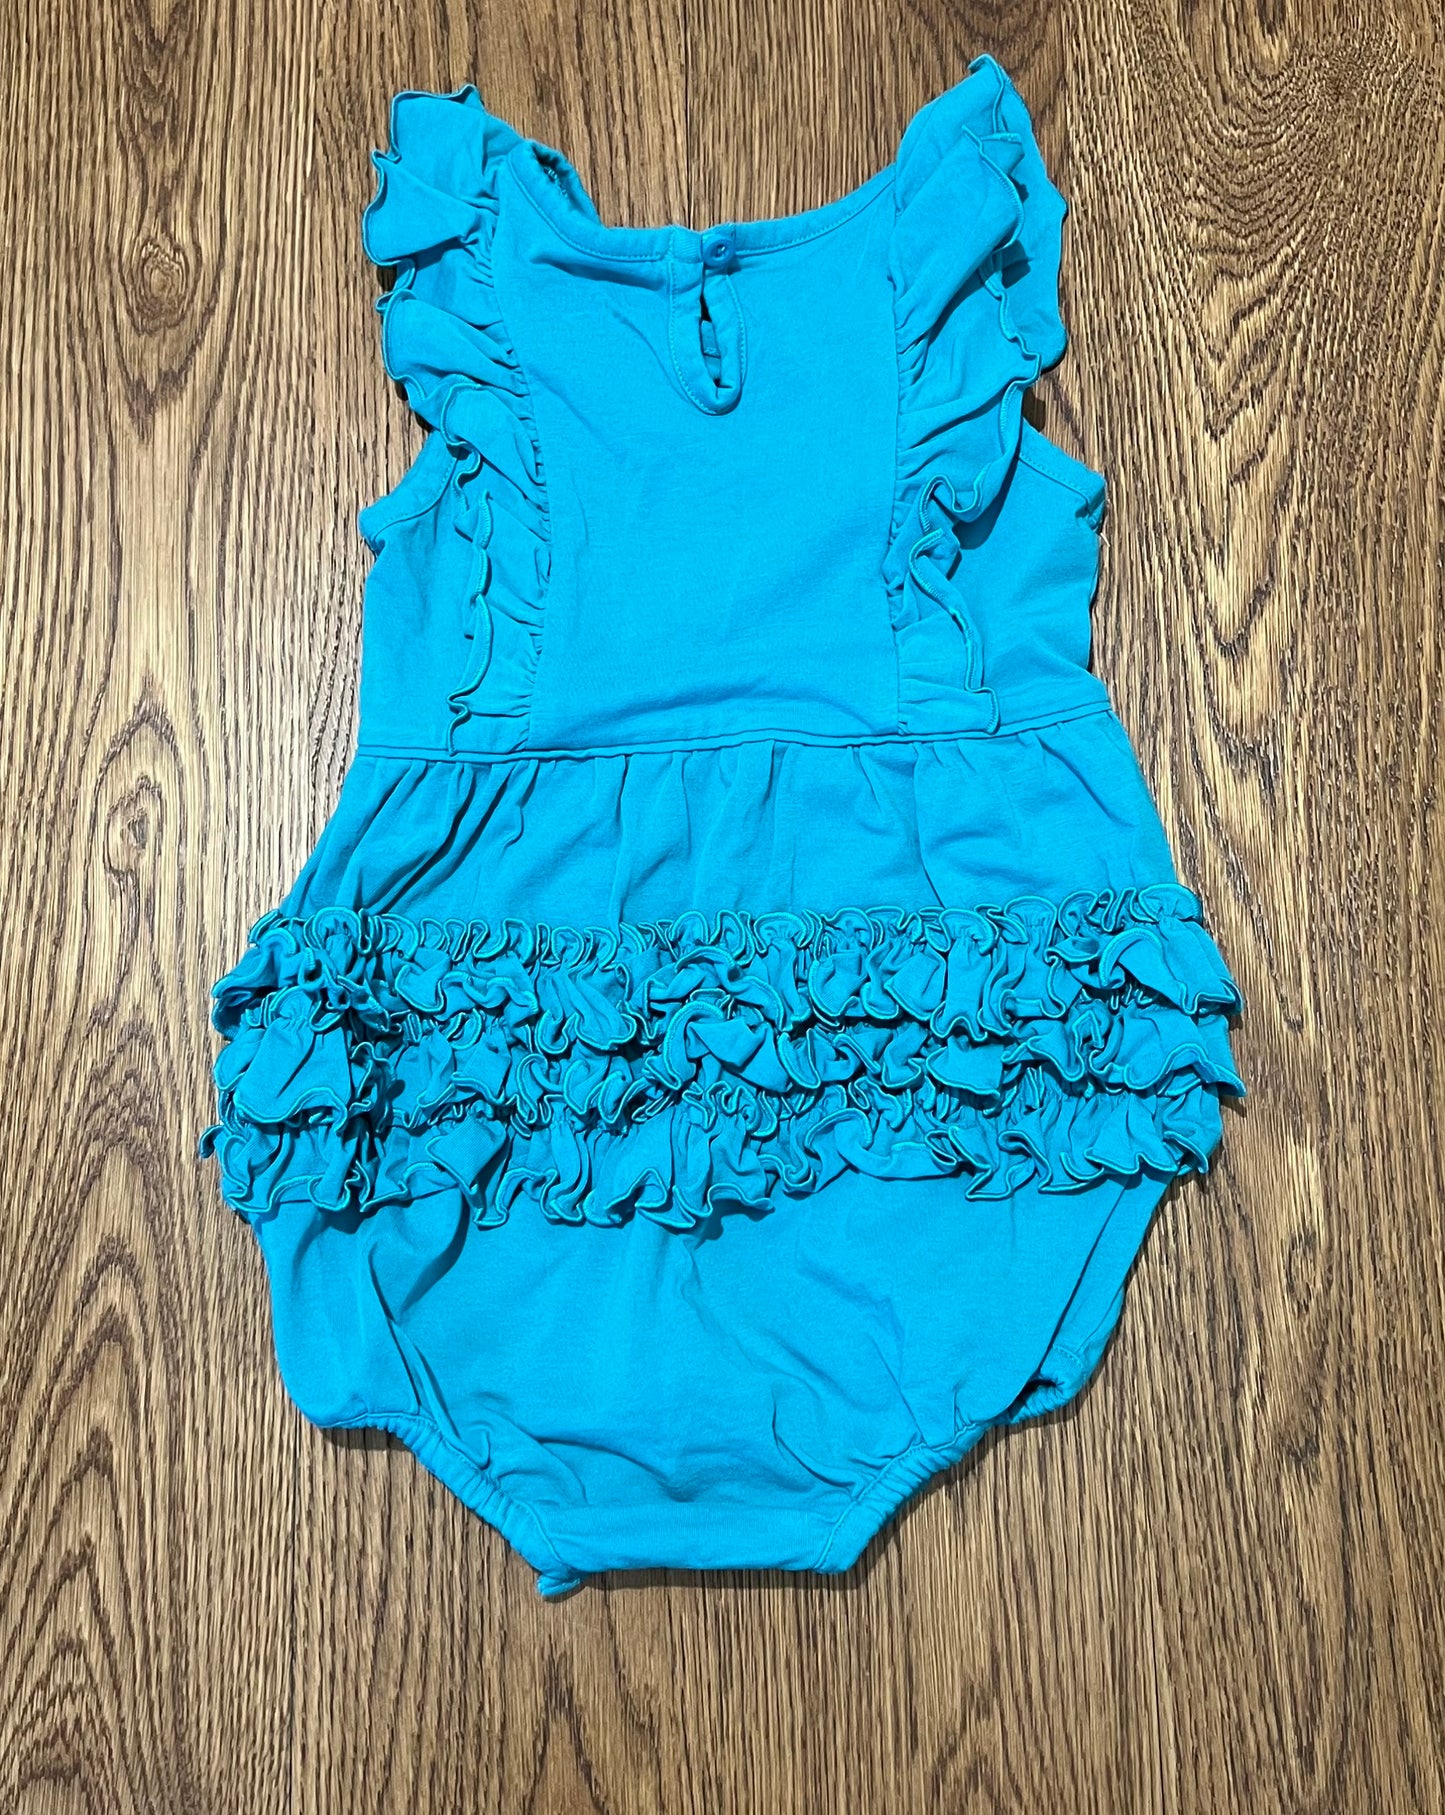 Ruffle Butts Girls 18-24 month Teal Romper